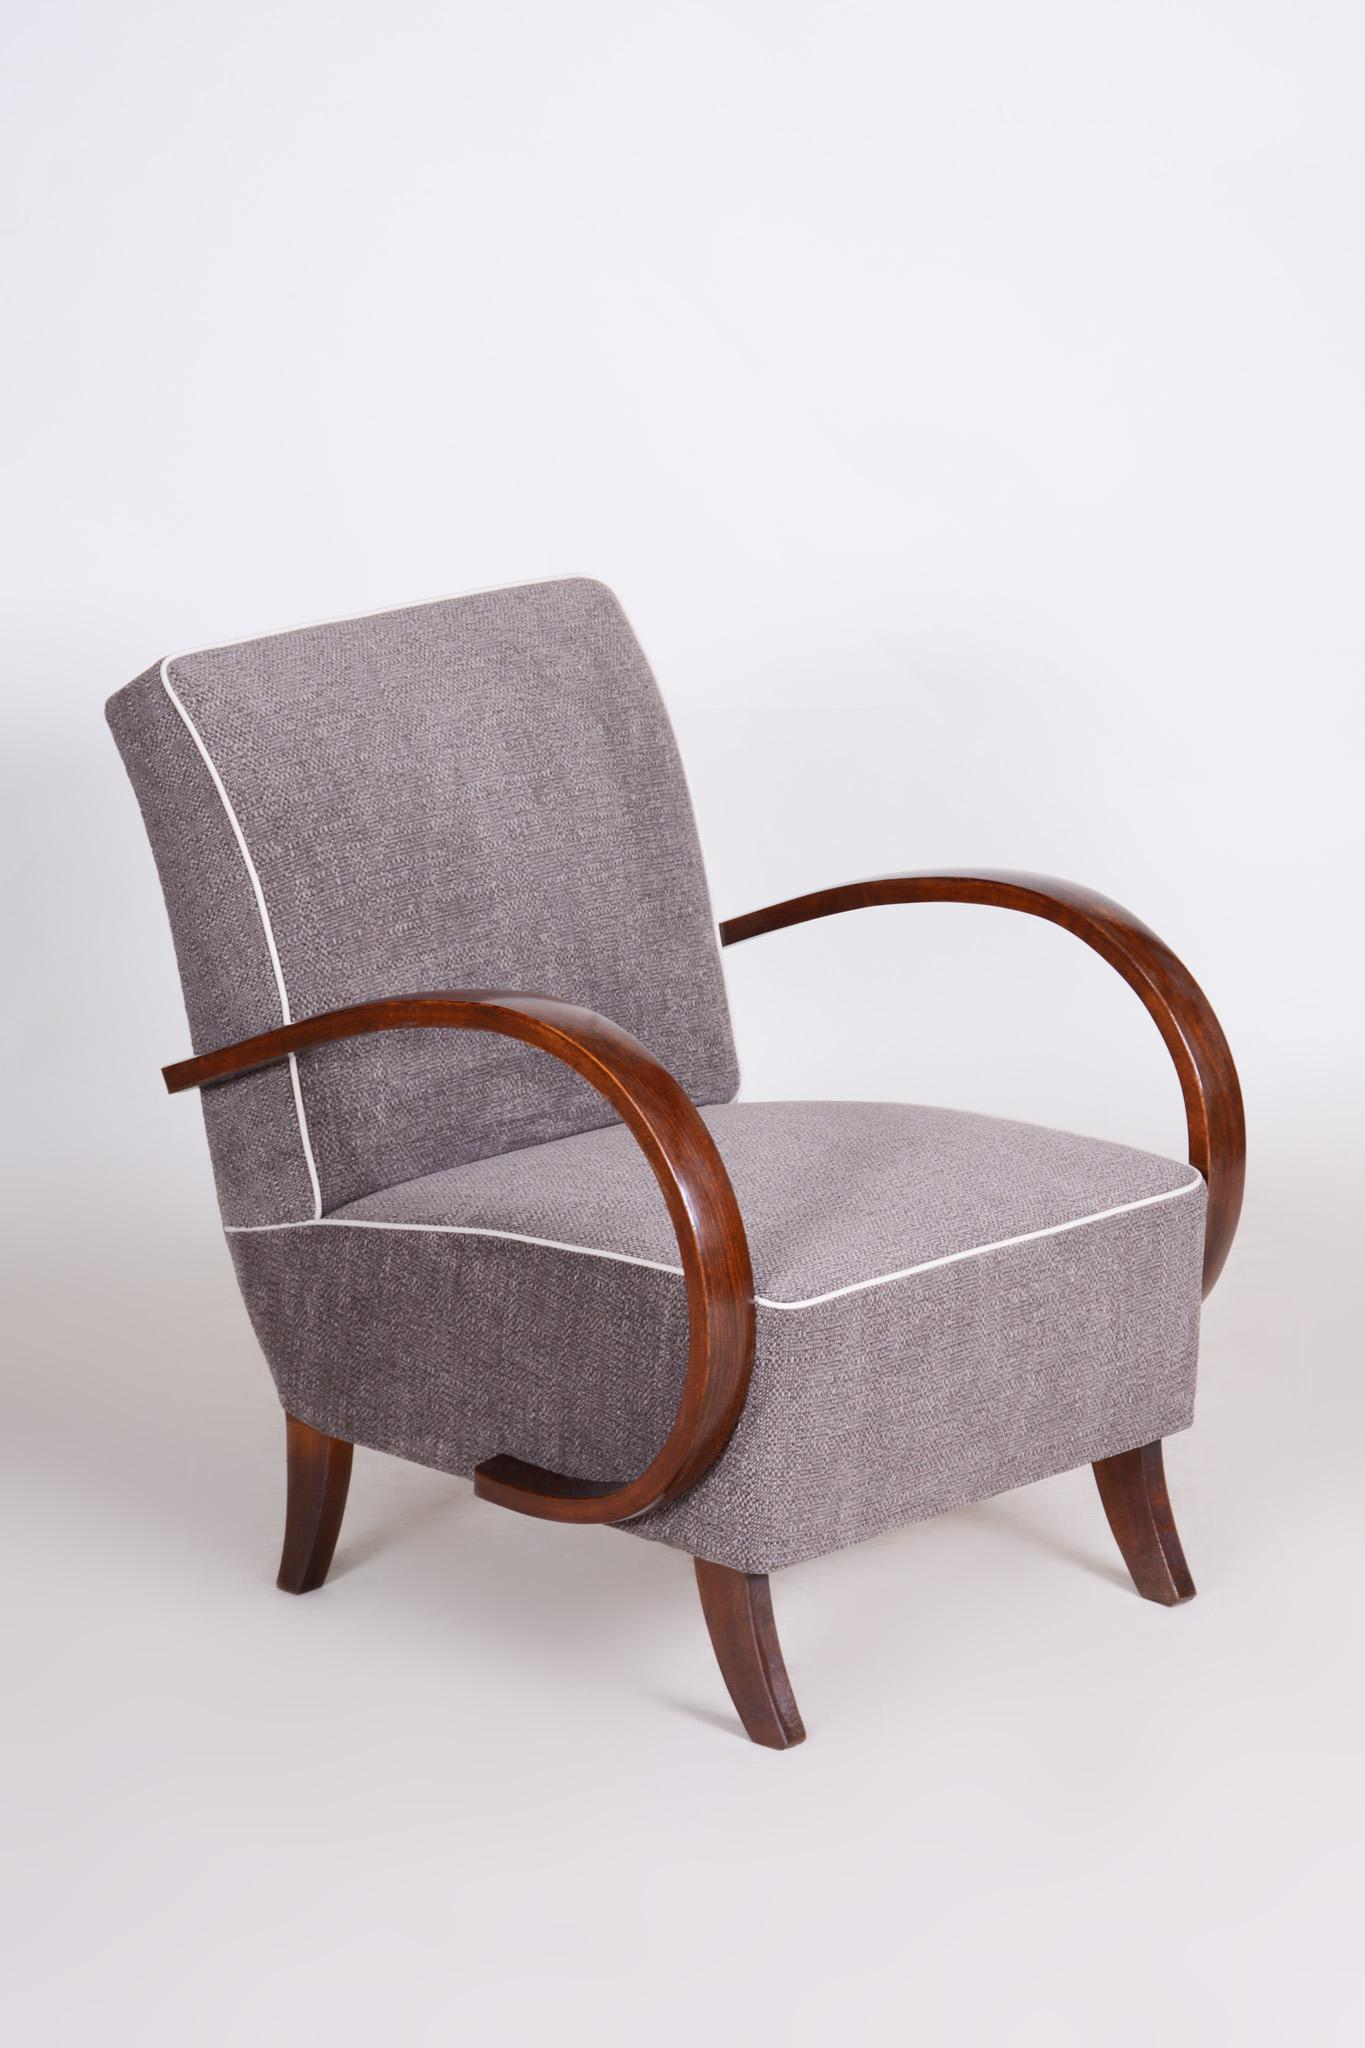 Fabric Pair of Grey Art Deco Armchairs Made in the 1930s, Fully Refurbished Beech For Sale